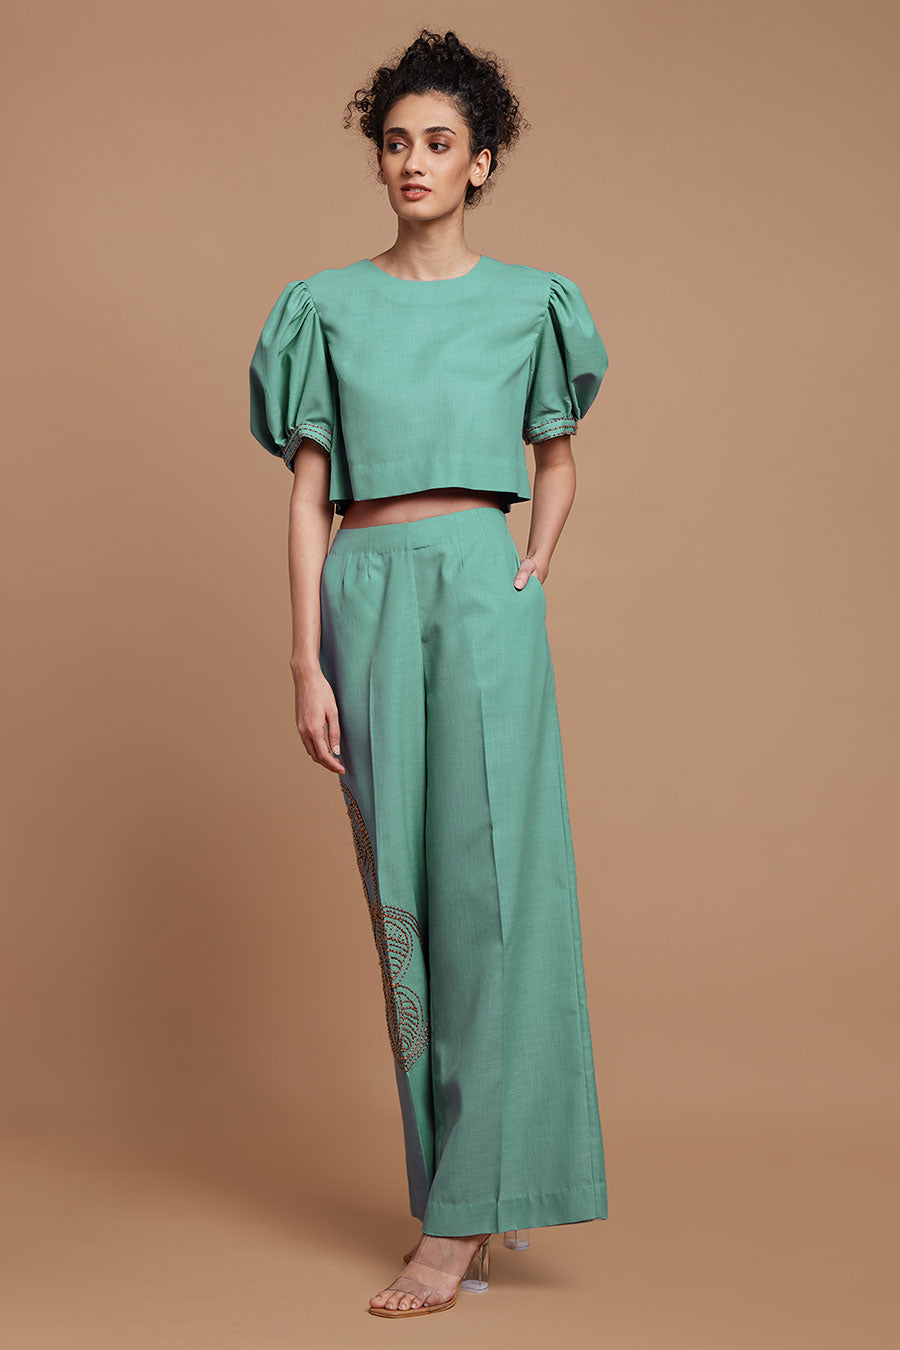 Teal Jute Embroidered Wide Legged Pants